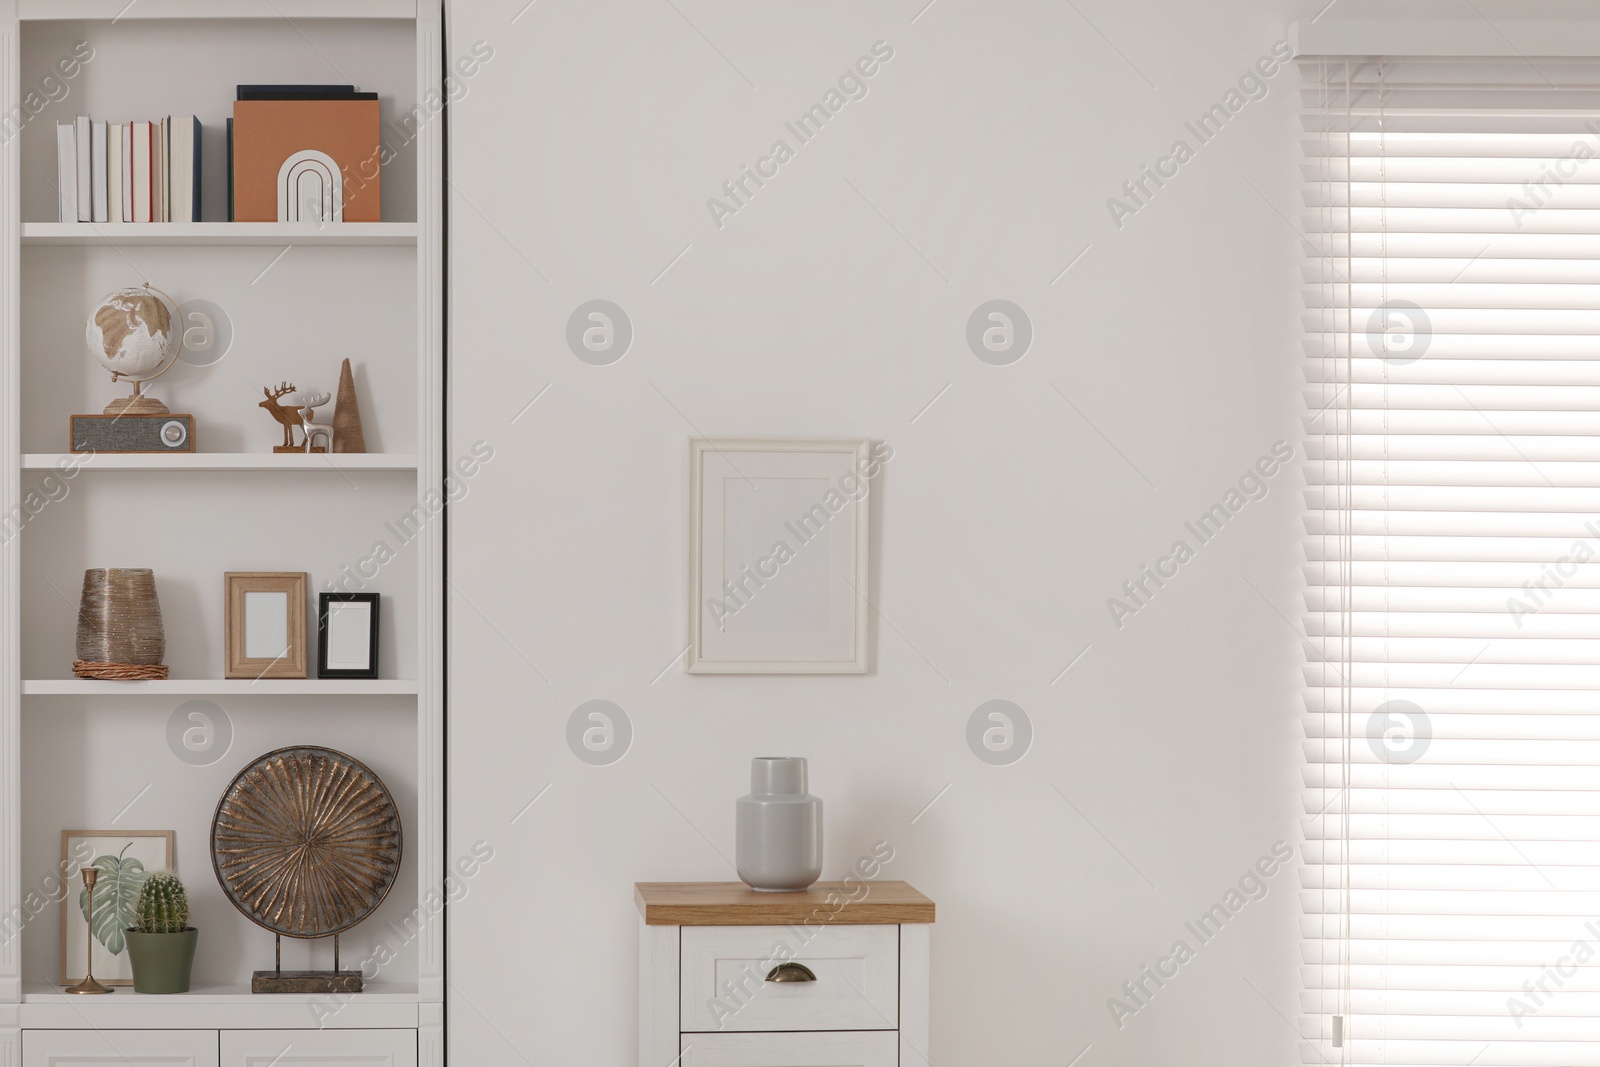 Photo of Stylish shelves with different decor elements and chest of drawers in room. Interior design